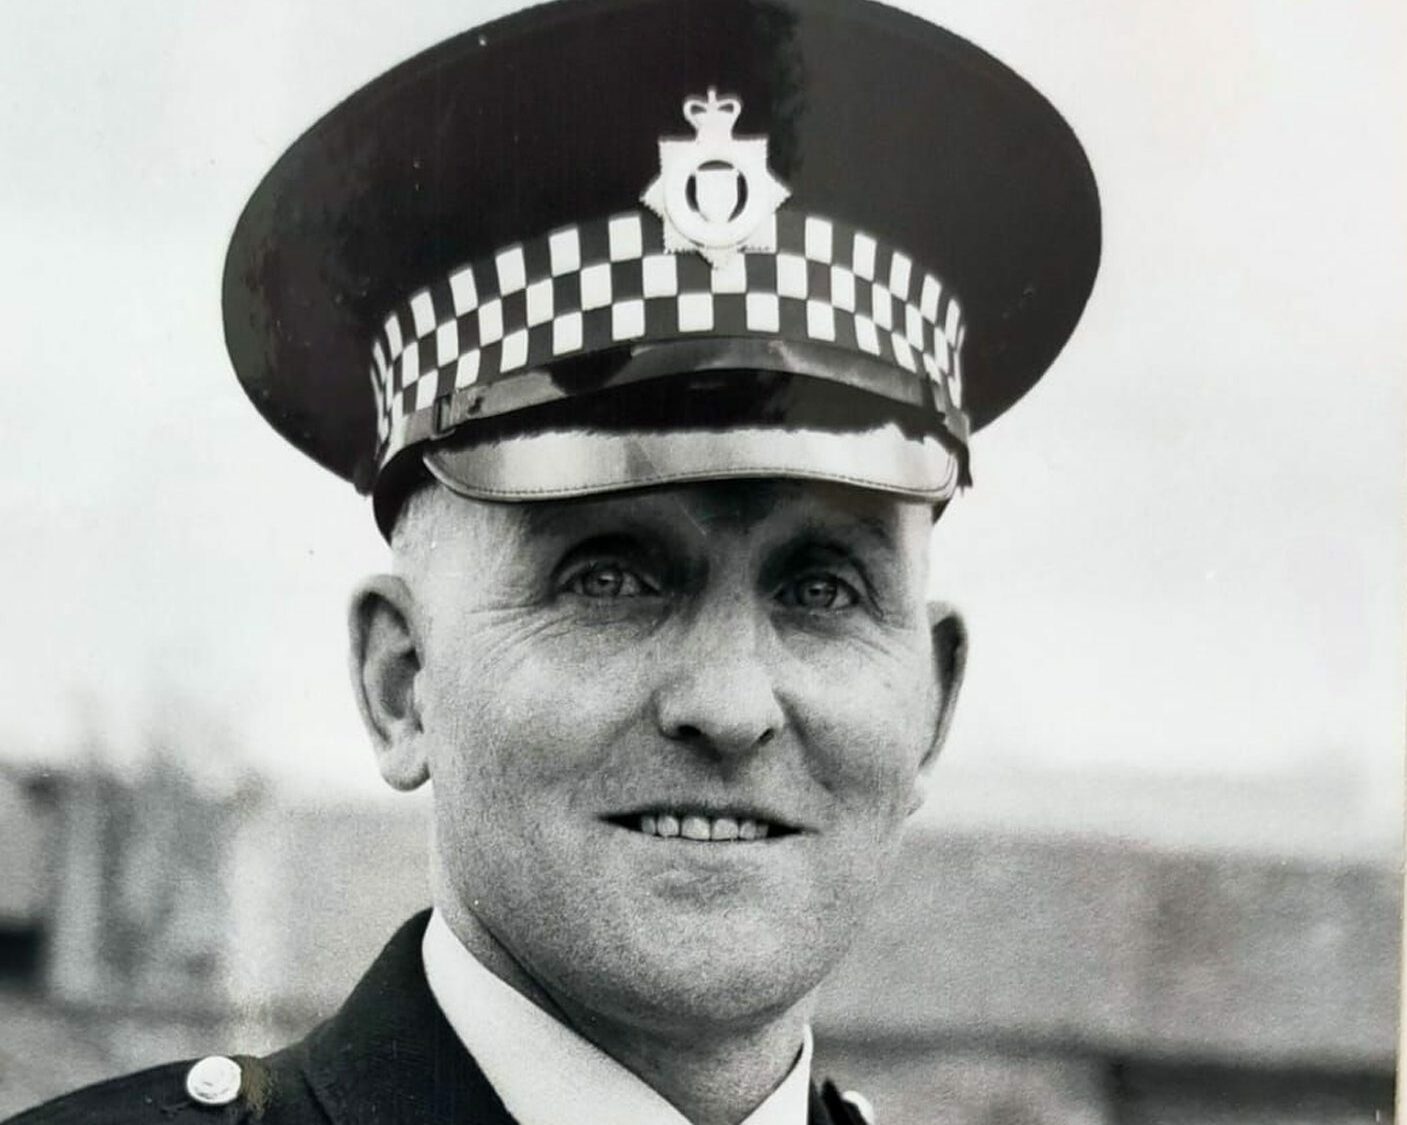 William (Bill) Tavendale during his time with British Transport Police.